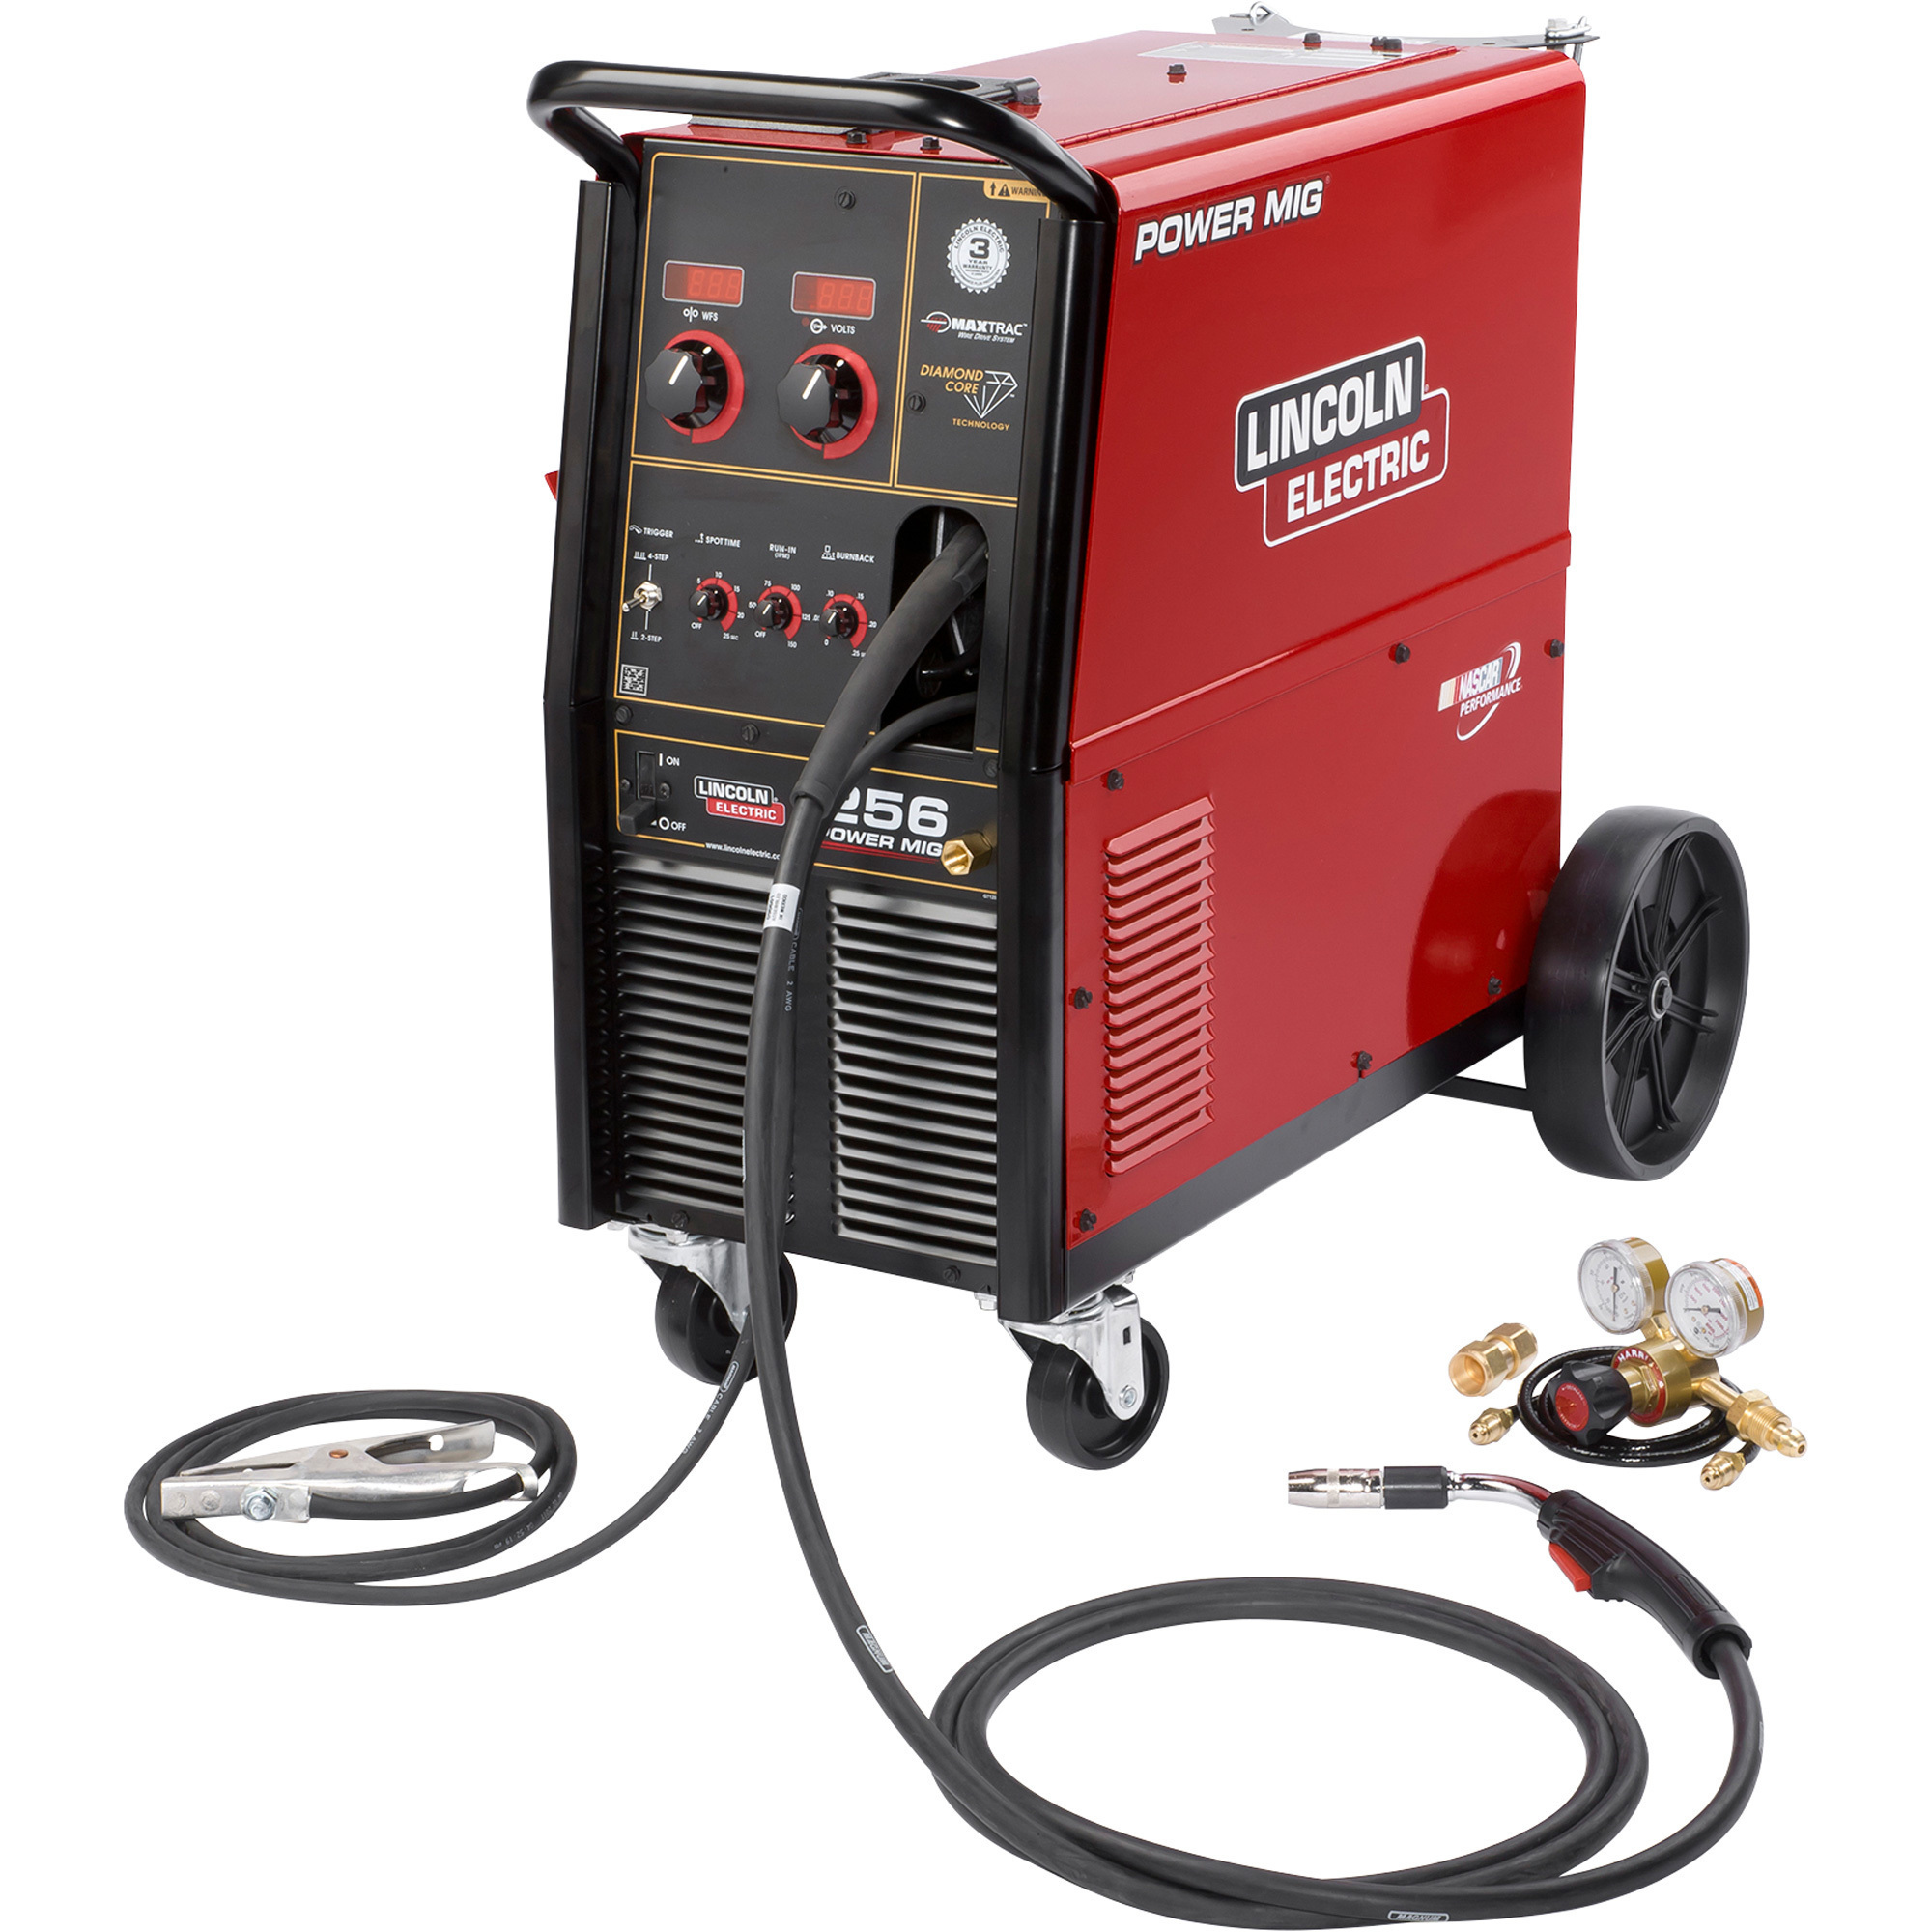 Power MIG 256 Flux-Core/MIG Welder with Undercarriage — 230/460/575V, 30–300 Amp Output, Model - Lincoln Electric K3068-2